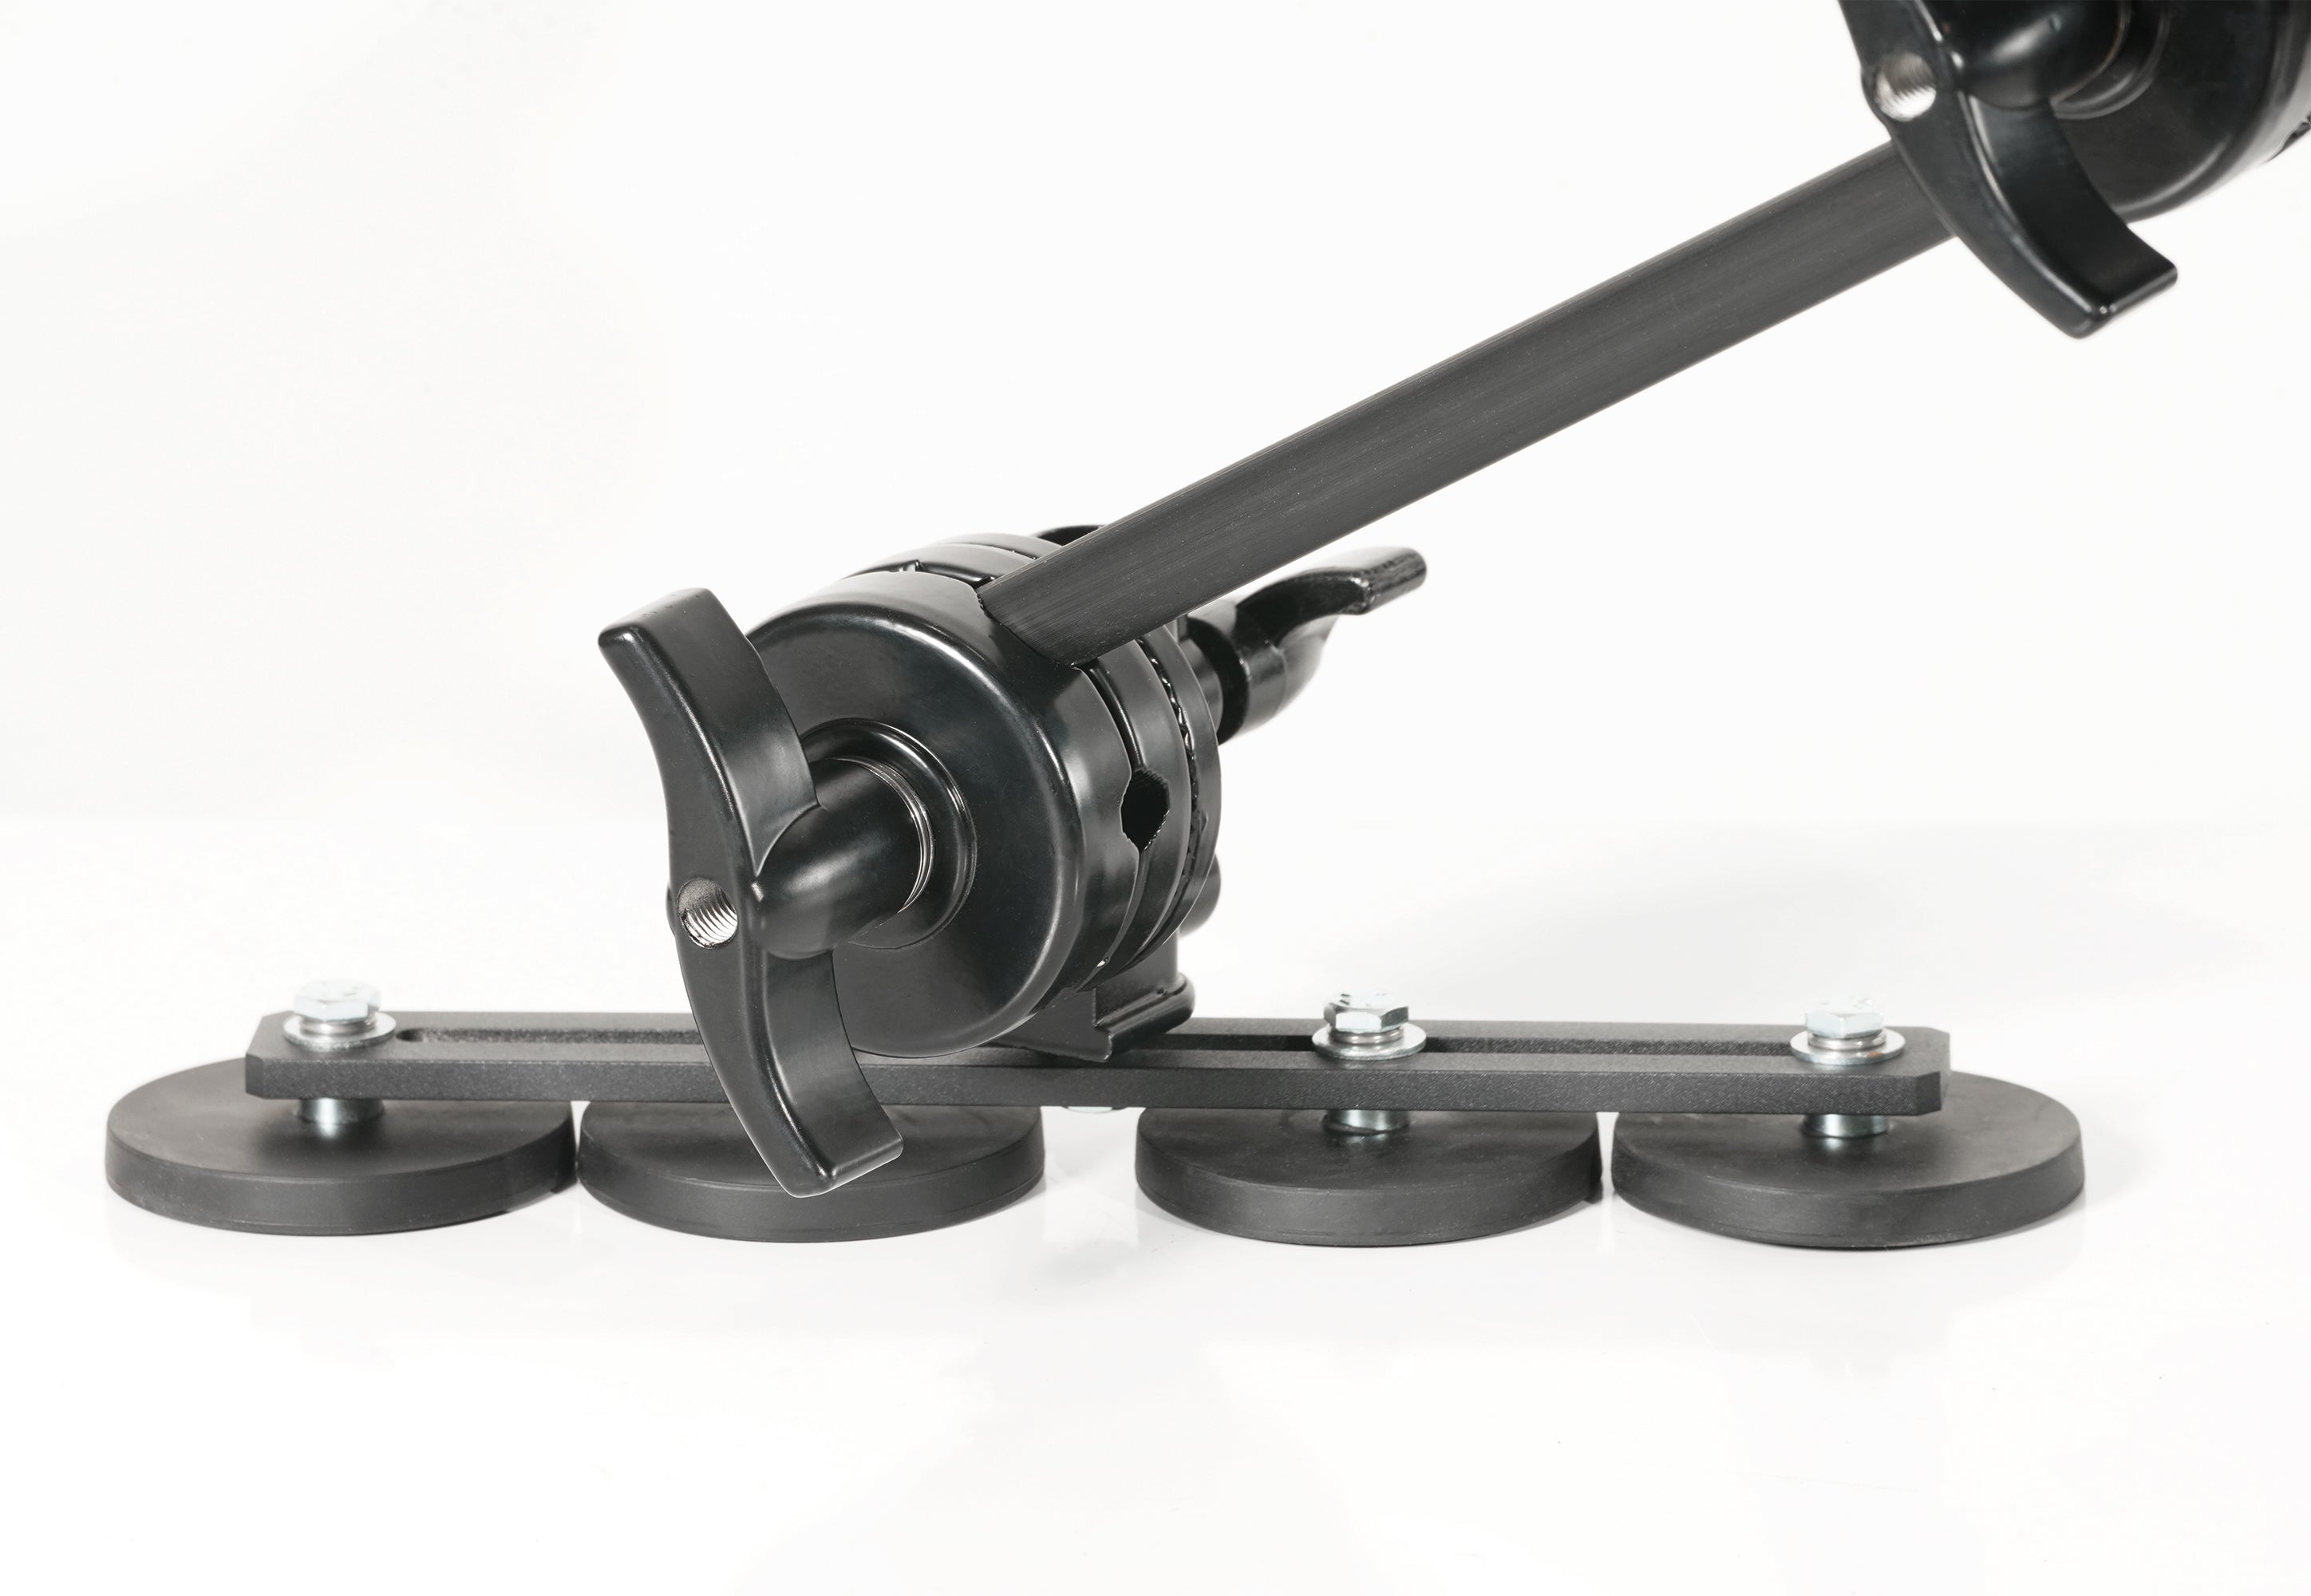 Modus Camera Mounting System V - 2 Platforms with Wire Sets, 3 Magnet Arms and 4 Wheel Sets